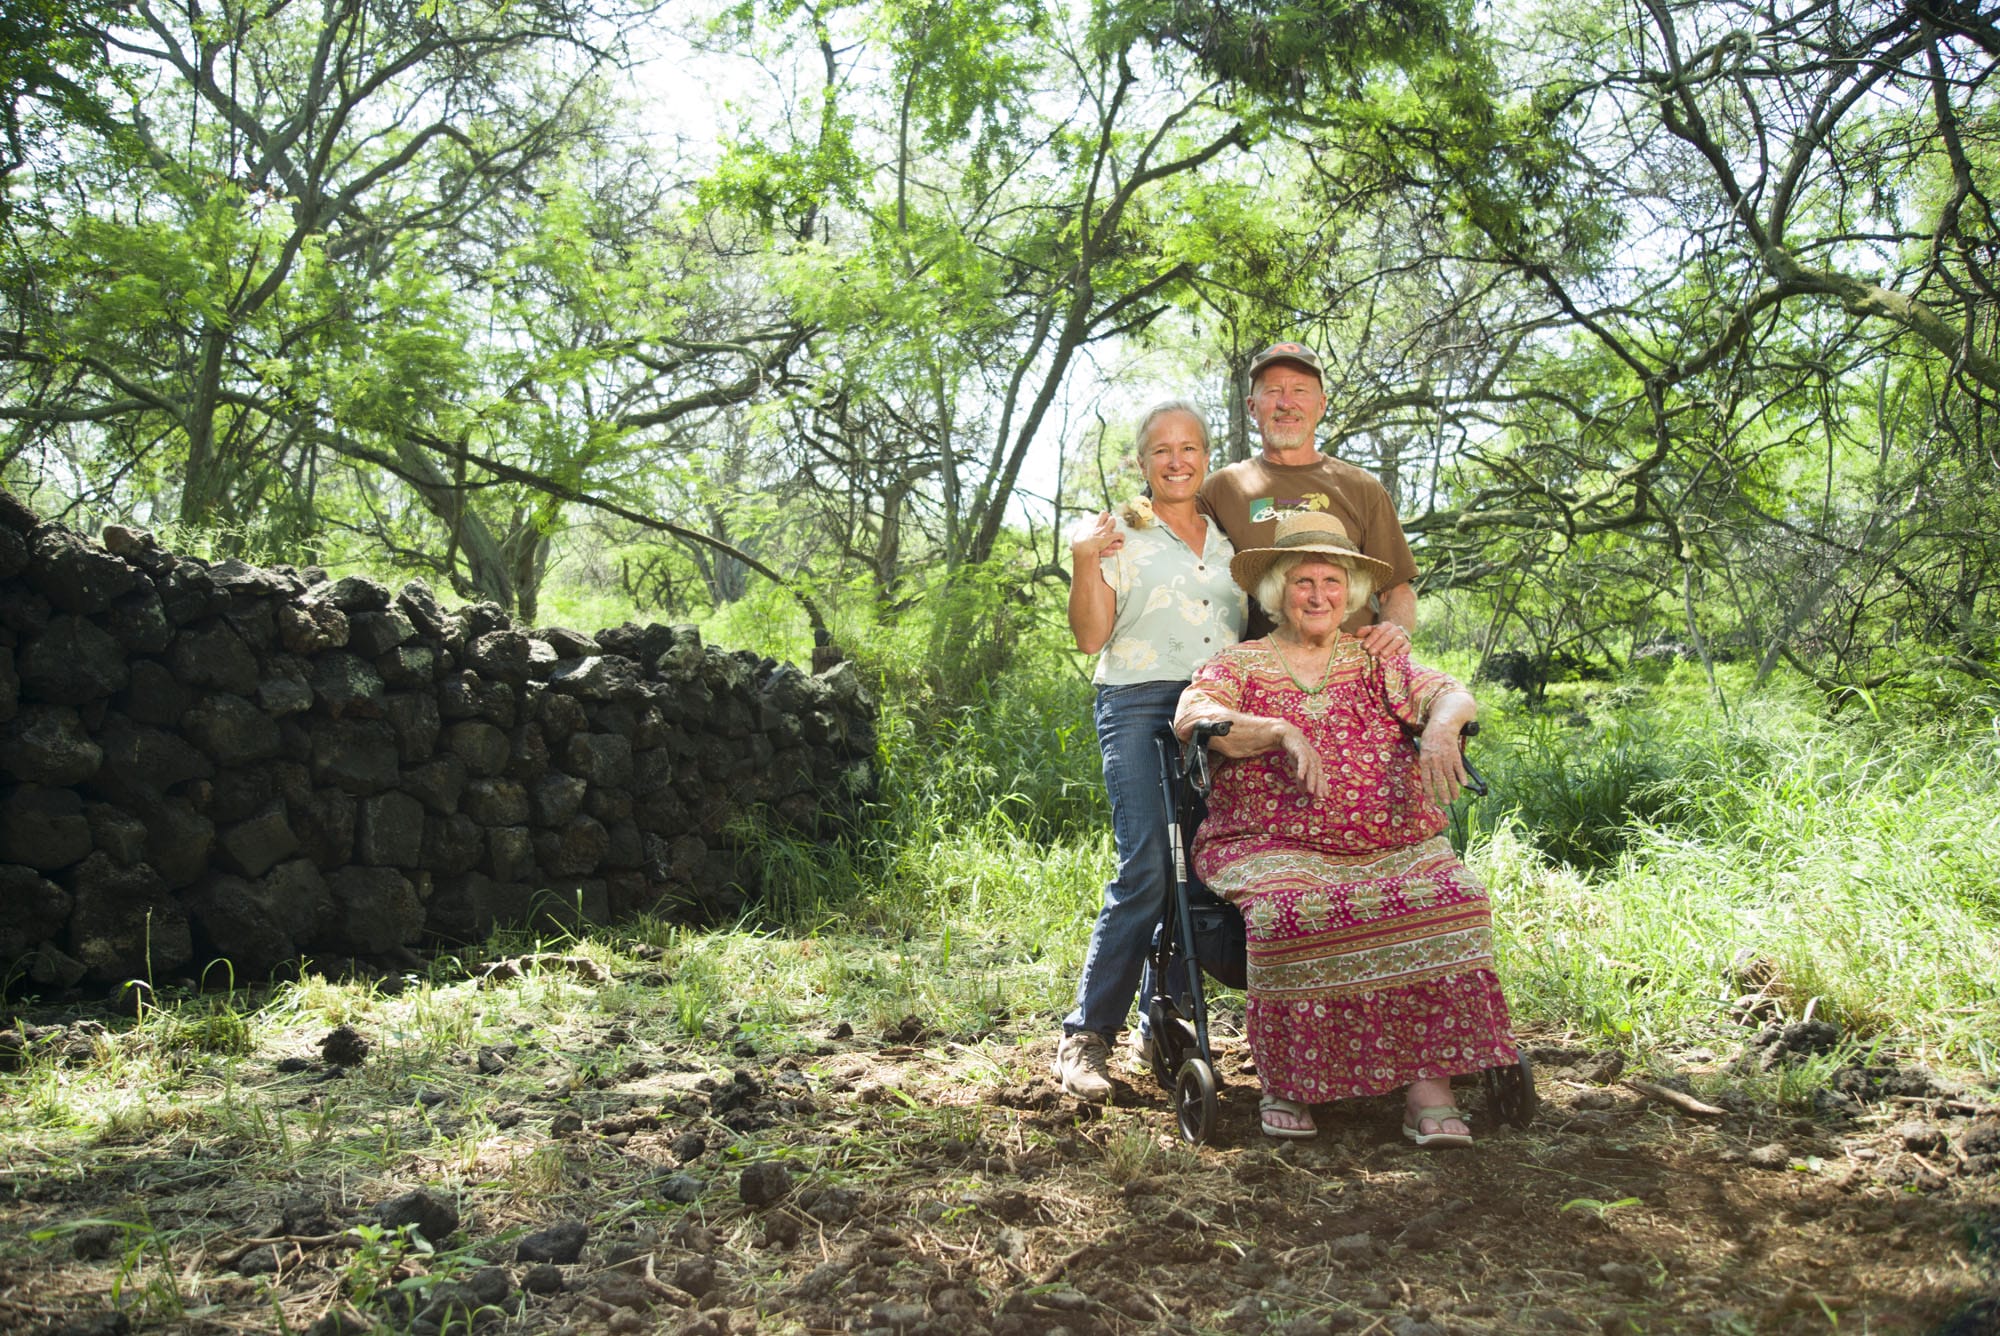 Three people standing next to a stone wall in a wooded area.